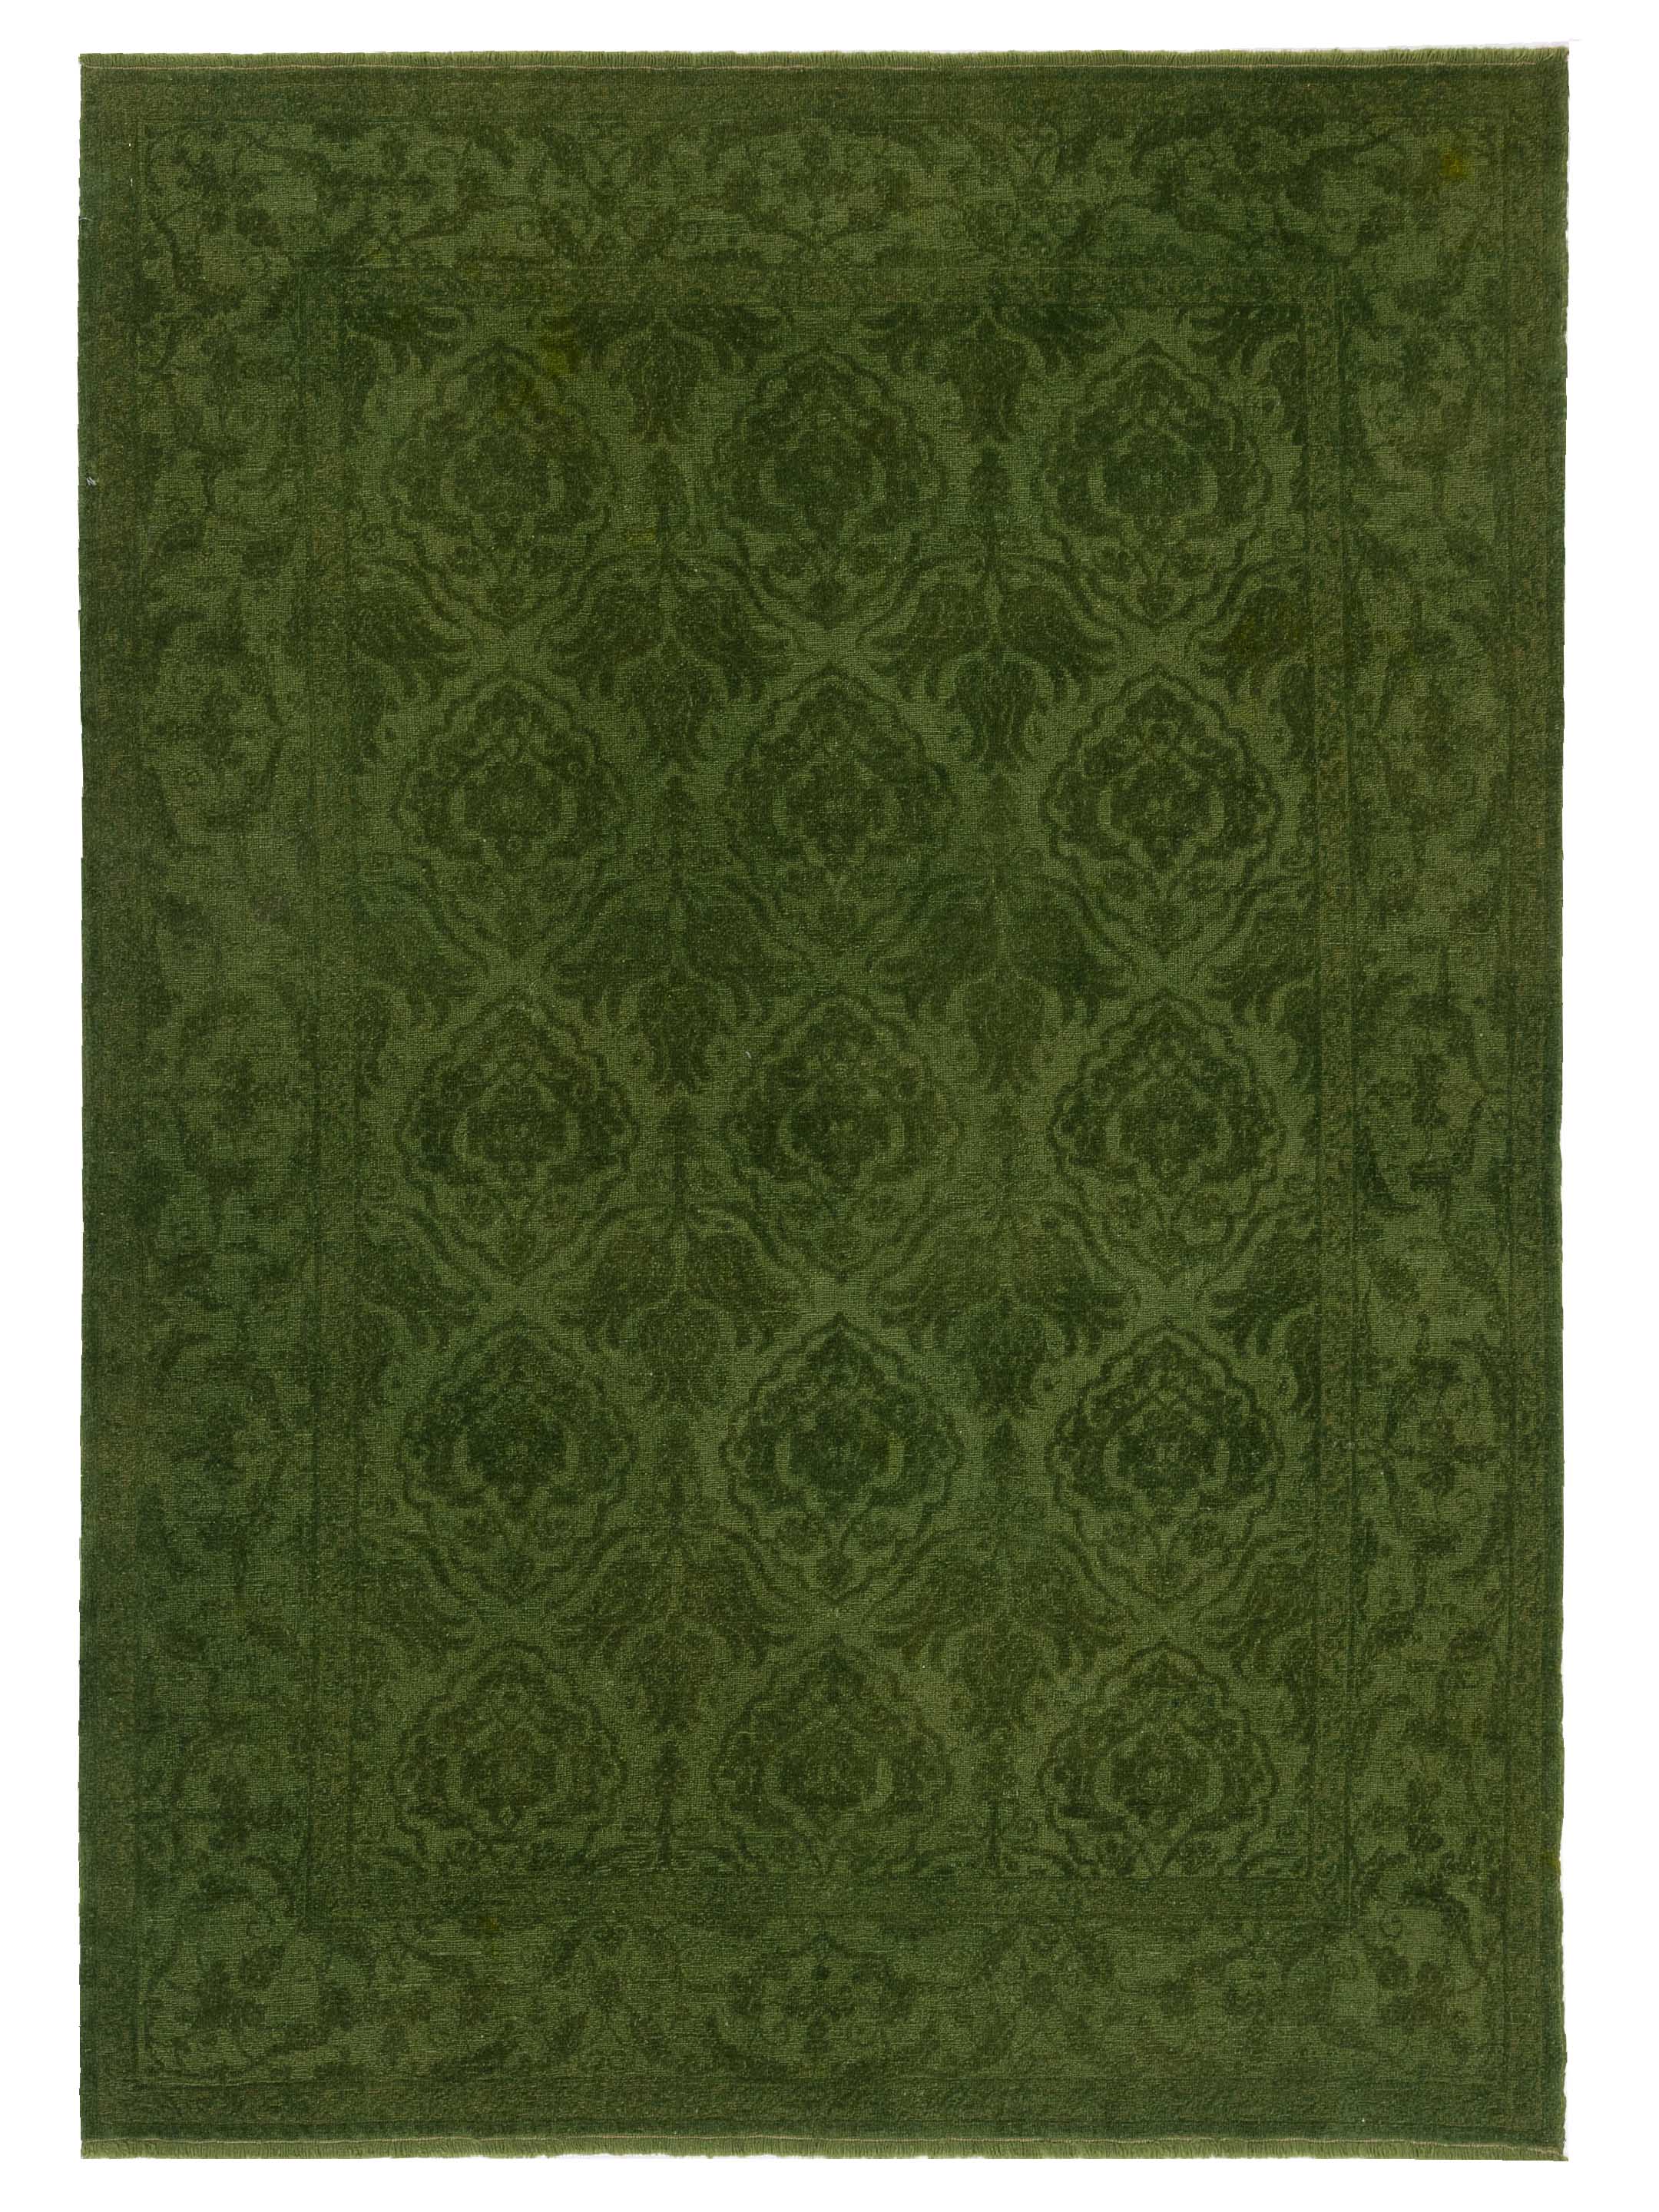 Transitional Green 6x9 Area Rug	